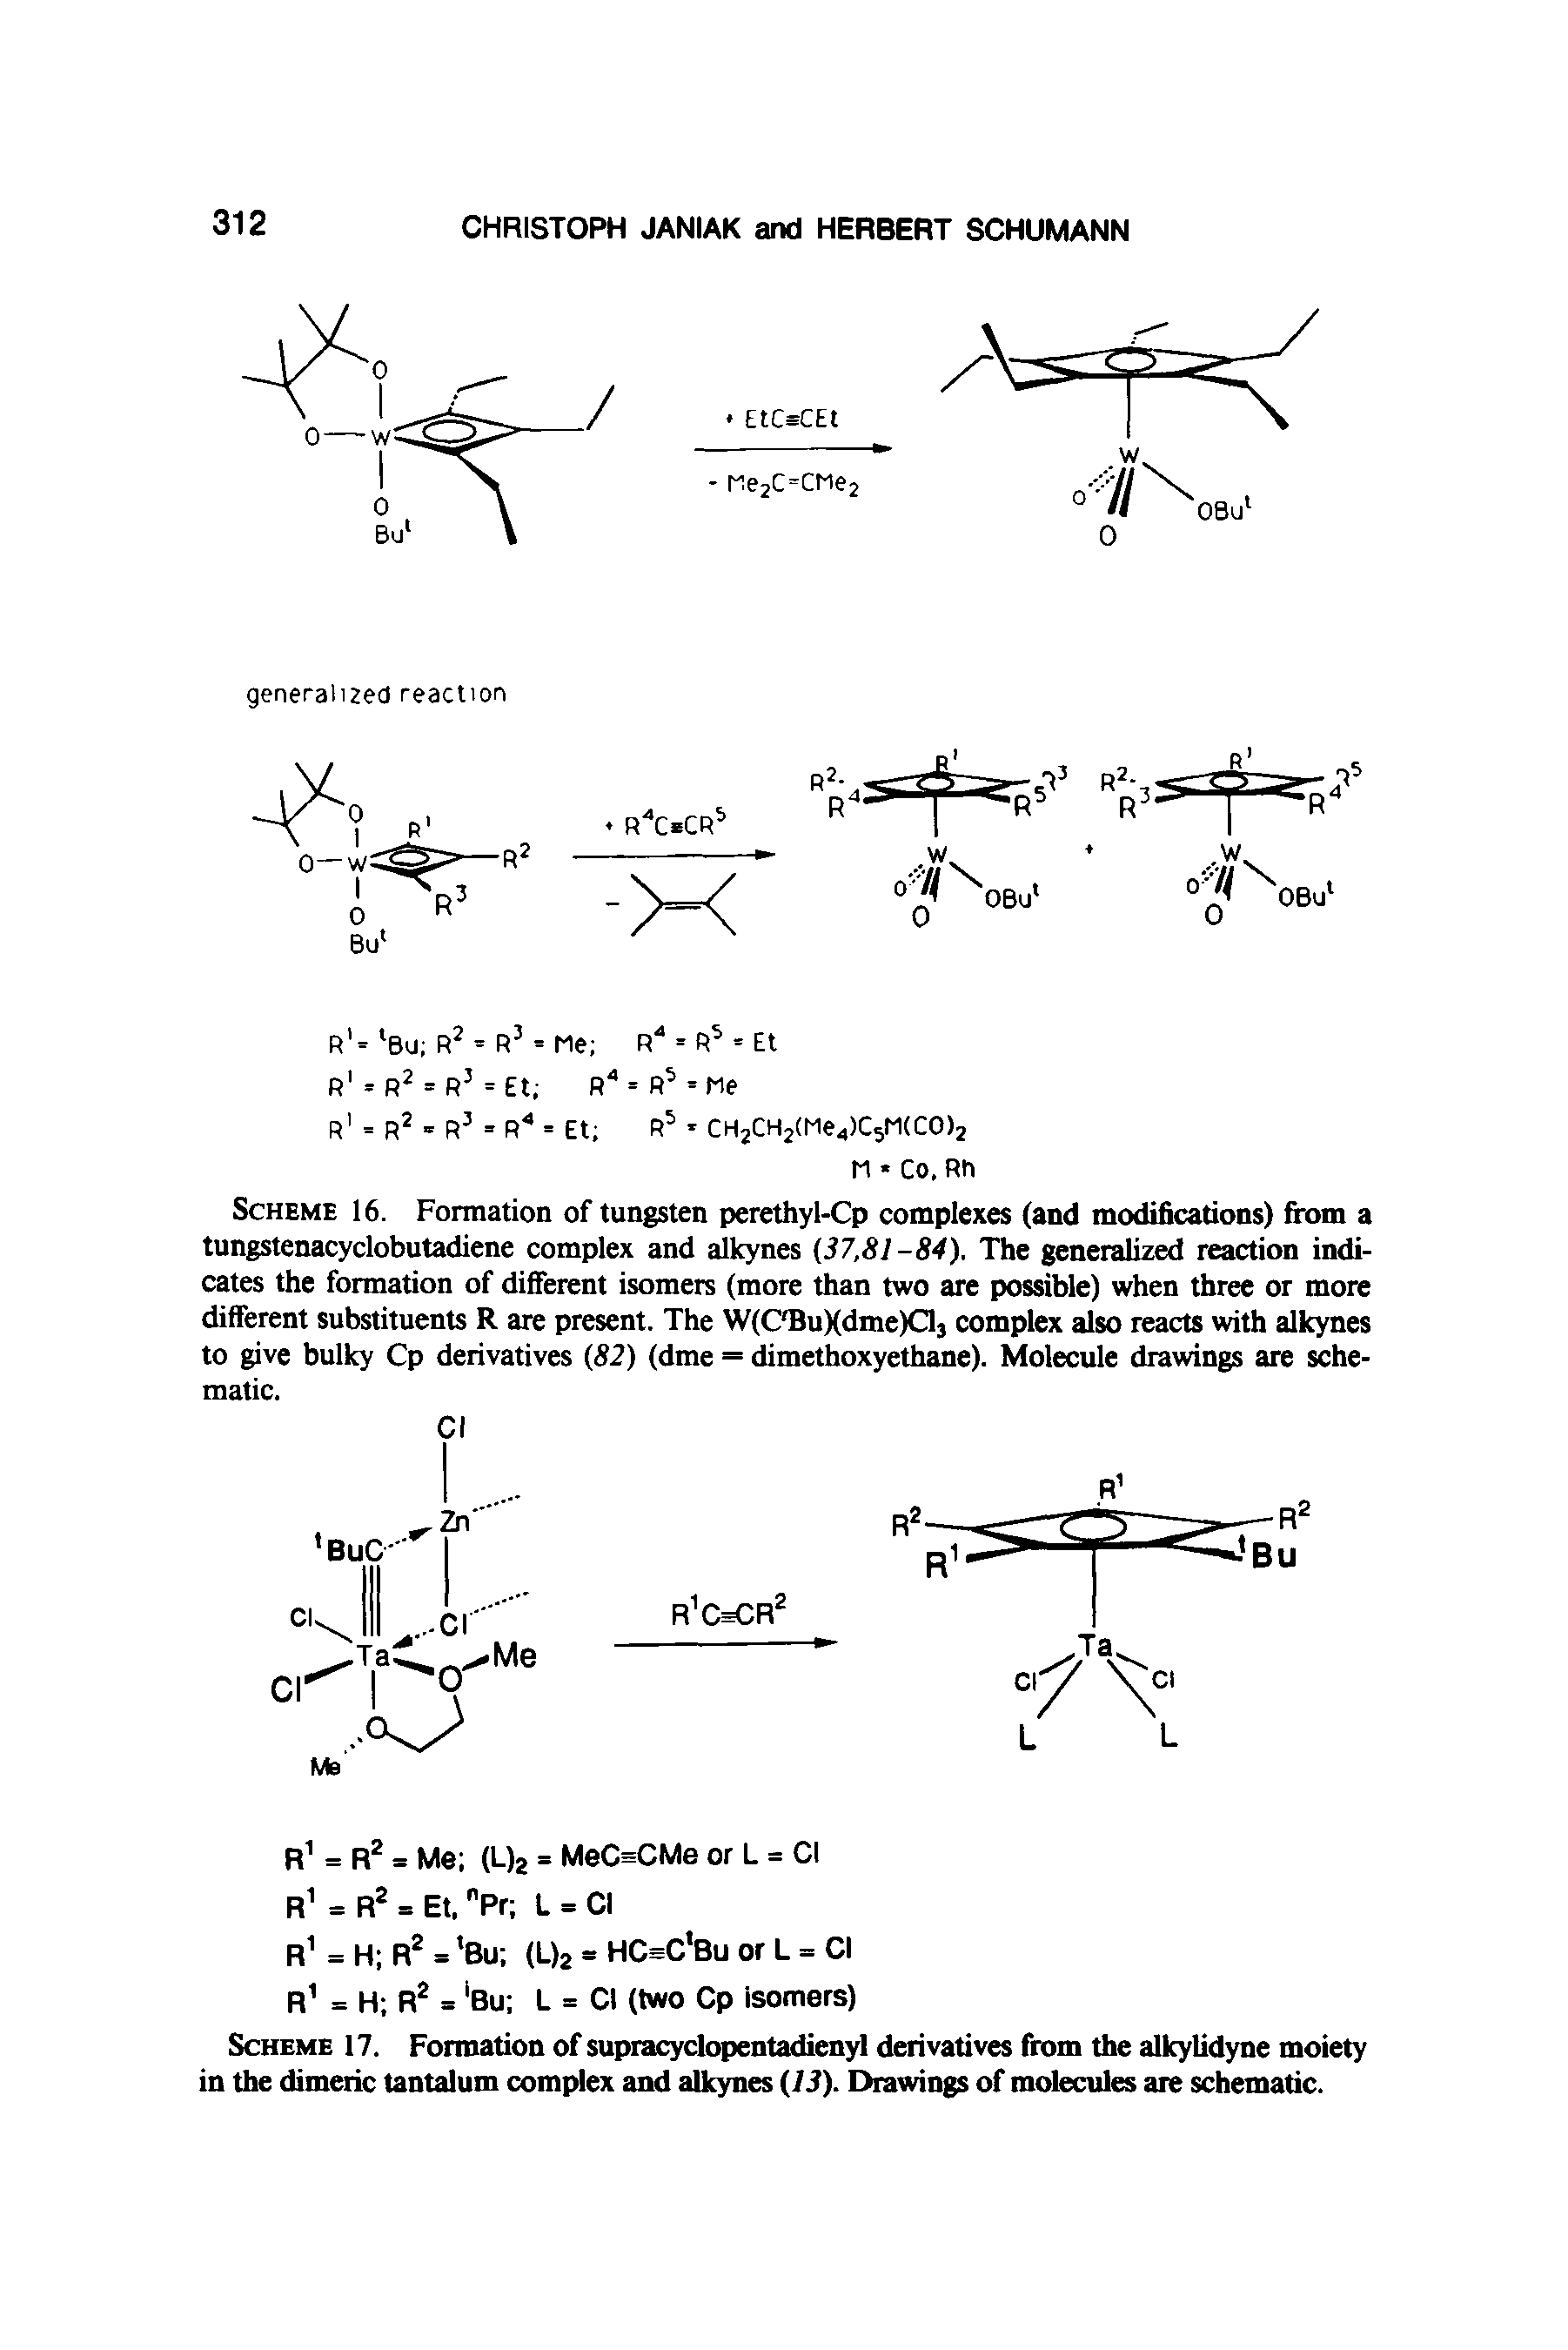 Scheme 17. Formation of supracyclopentadienyl derivatives from the alkylidyne moiety in the dimeric tantalum complex and alkynes (13). Drawings of molecules are schematic.